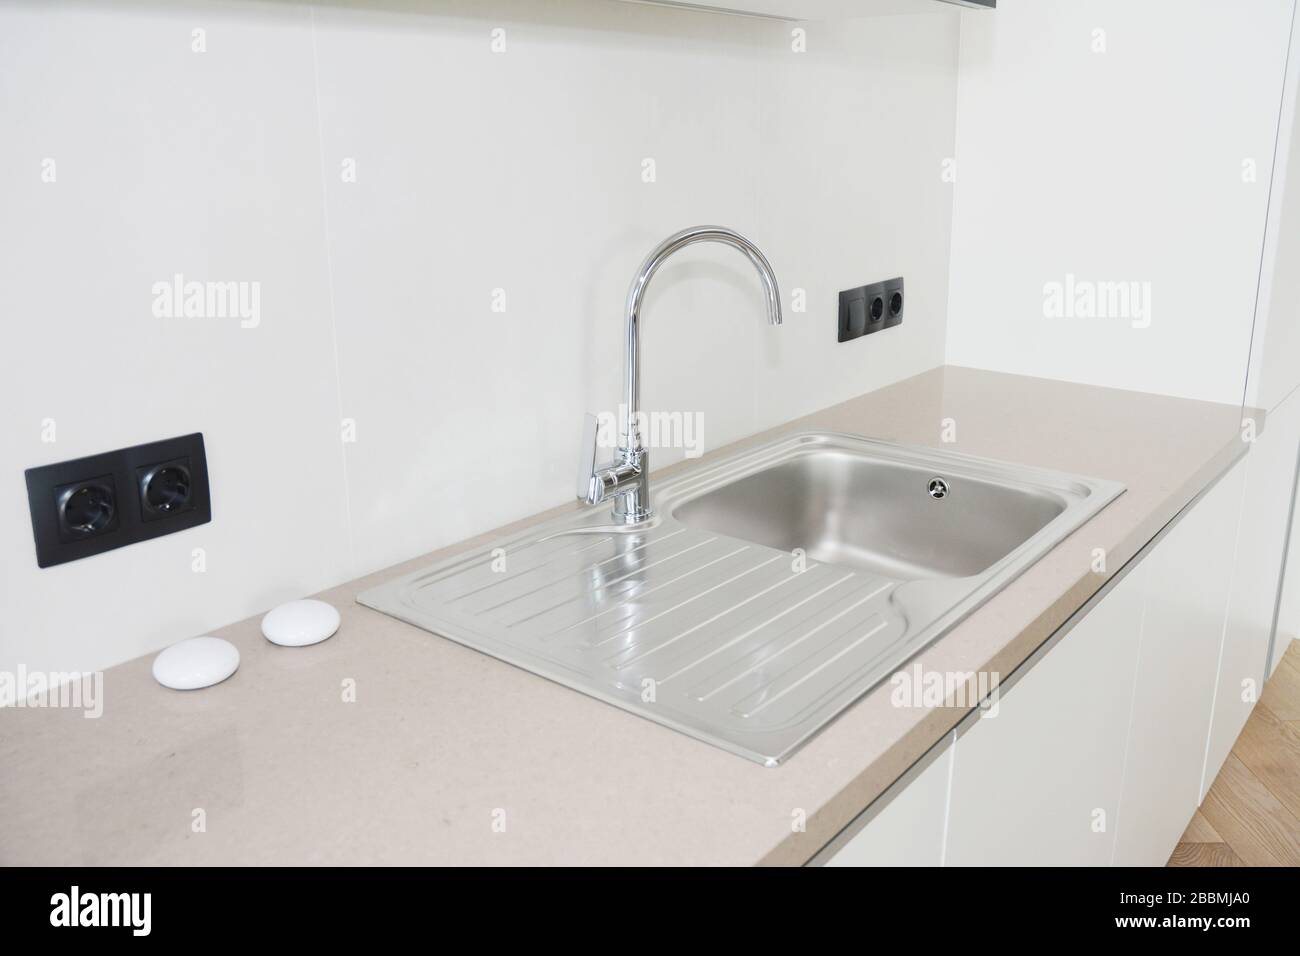 Modern kitchen metal faucet and  kitchen sink. Stock Photo